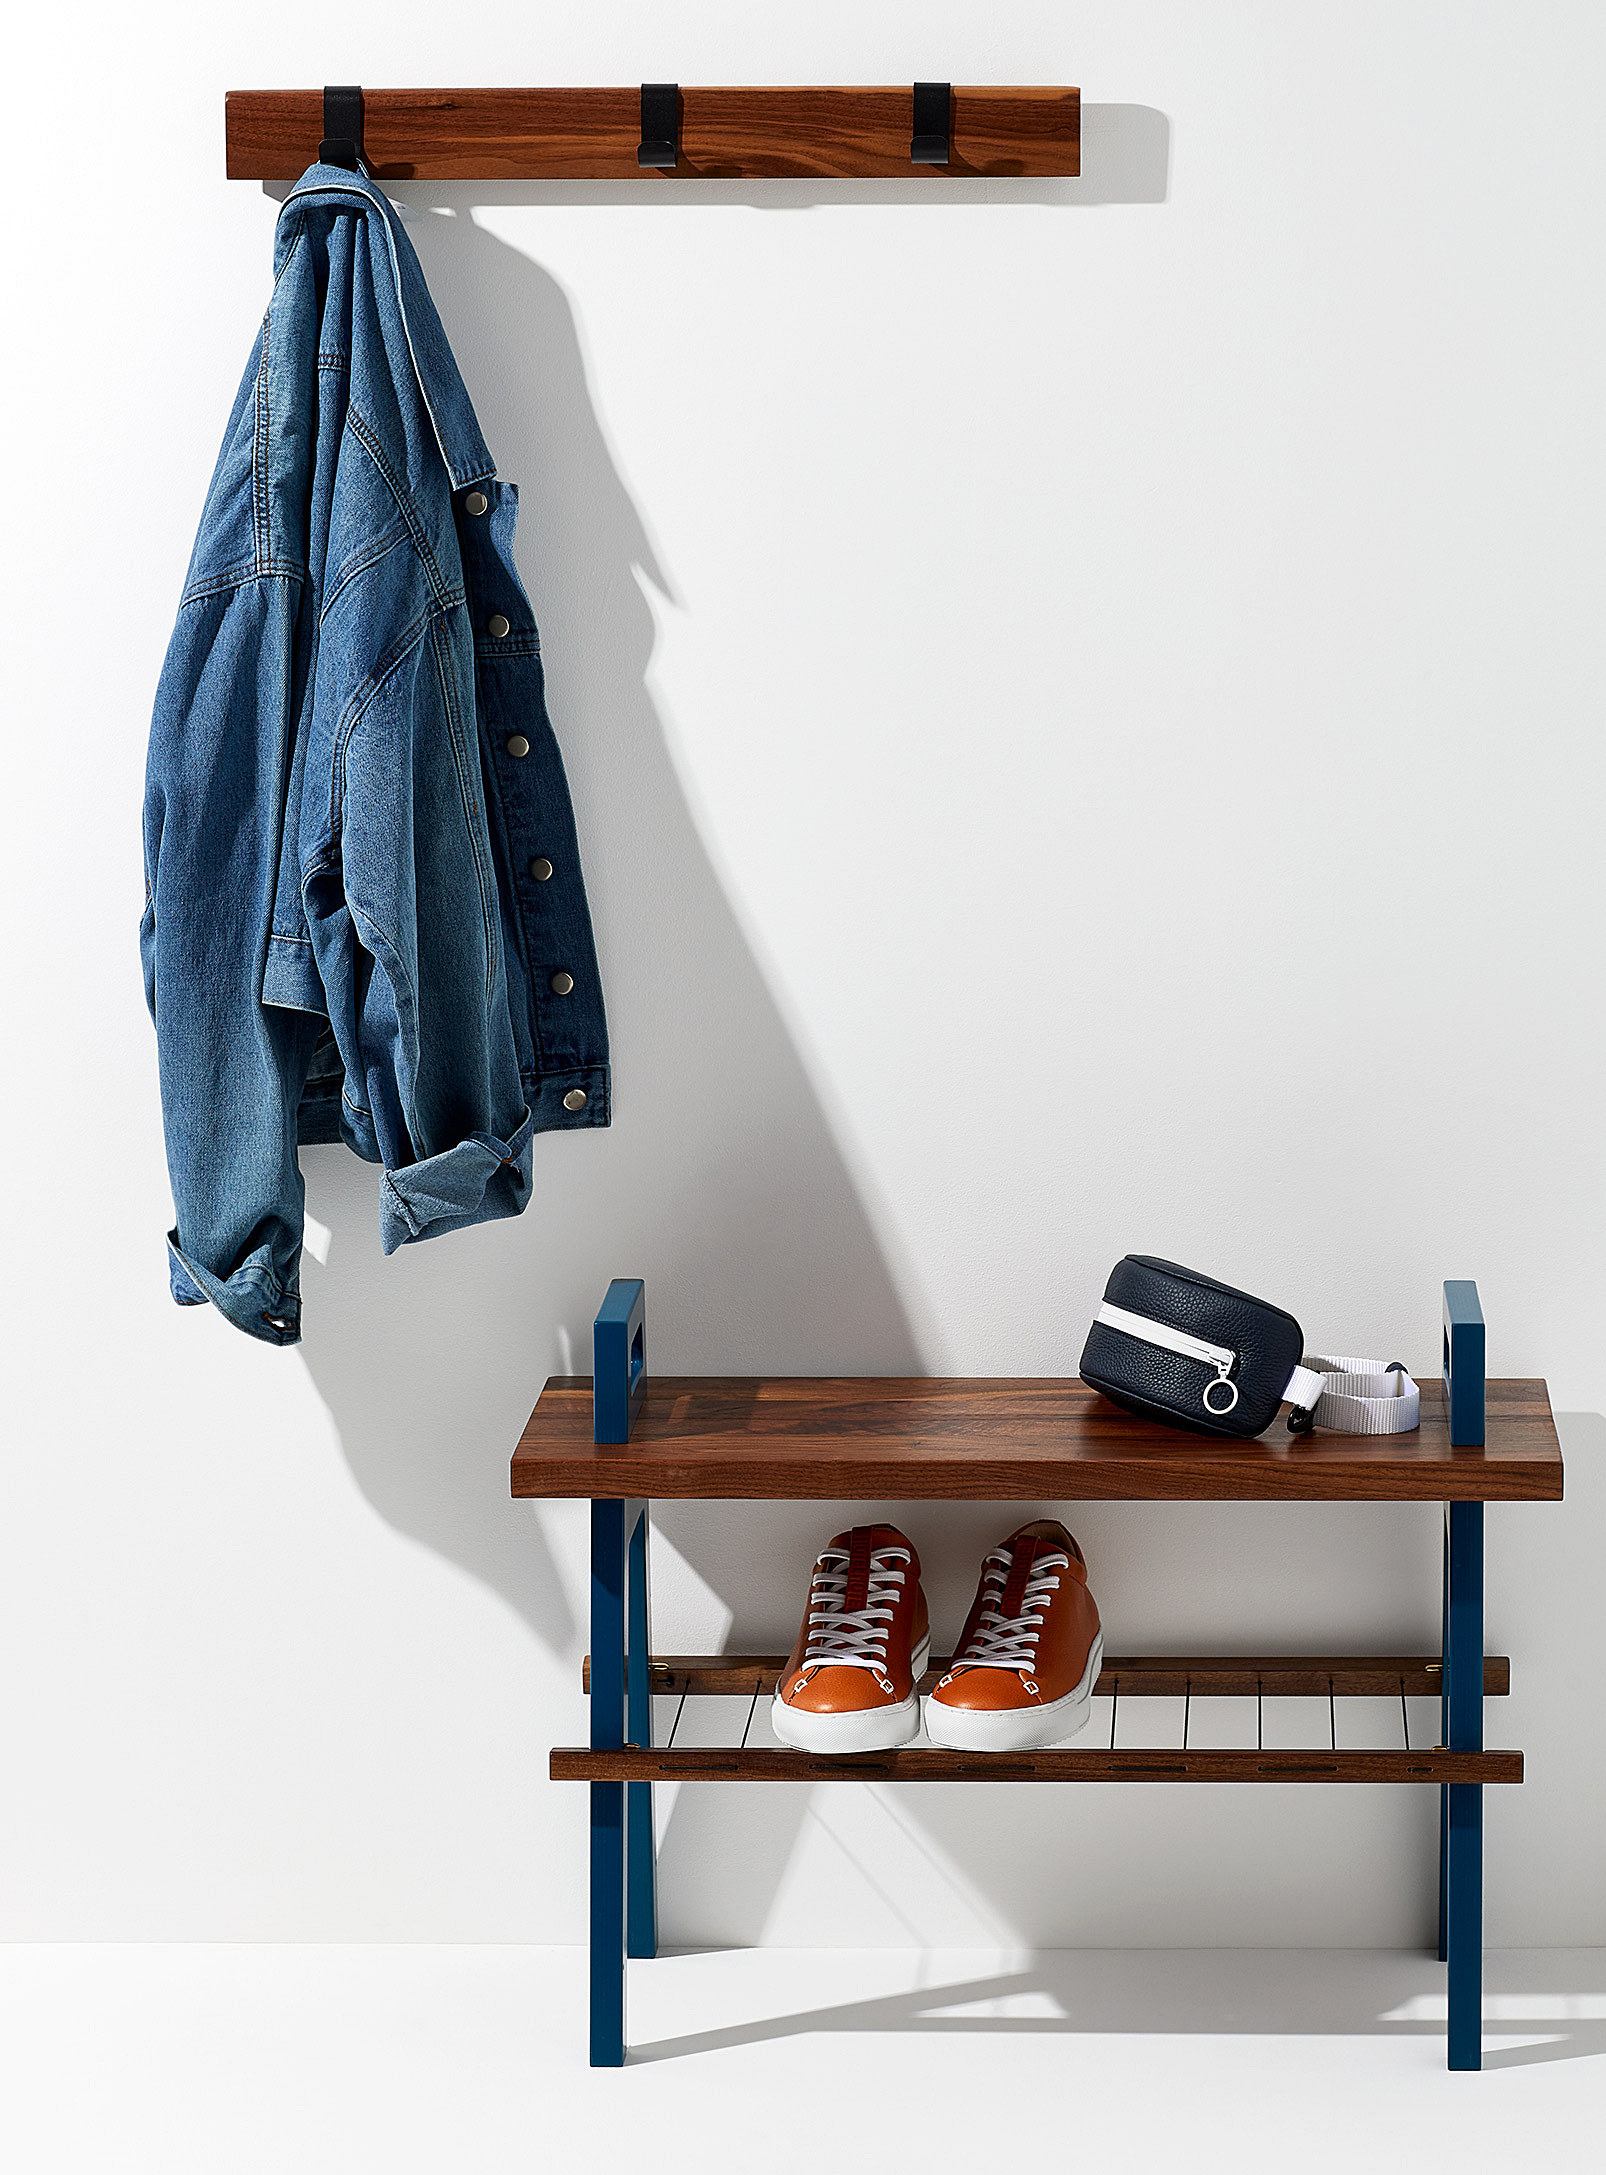 A wooden bench underneath a coat rack